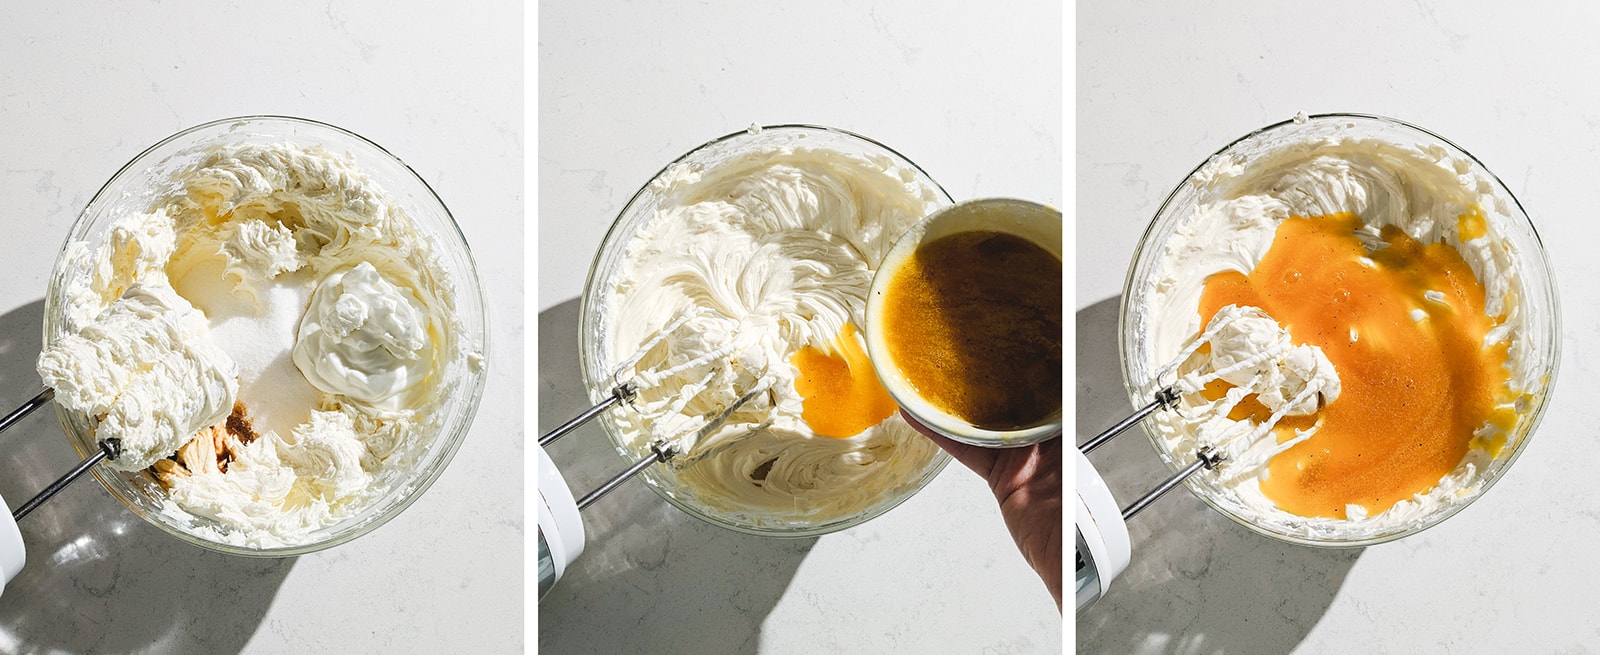 3 image collage of mixing cheesecake batter in a bowl.